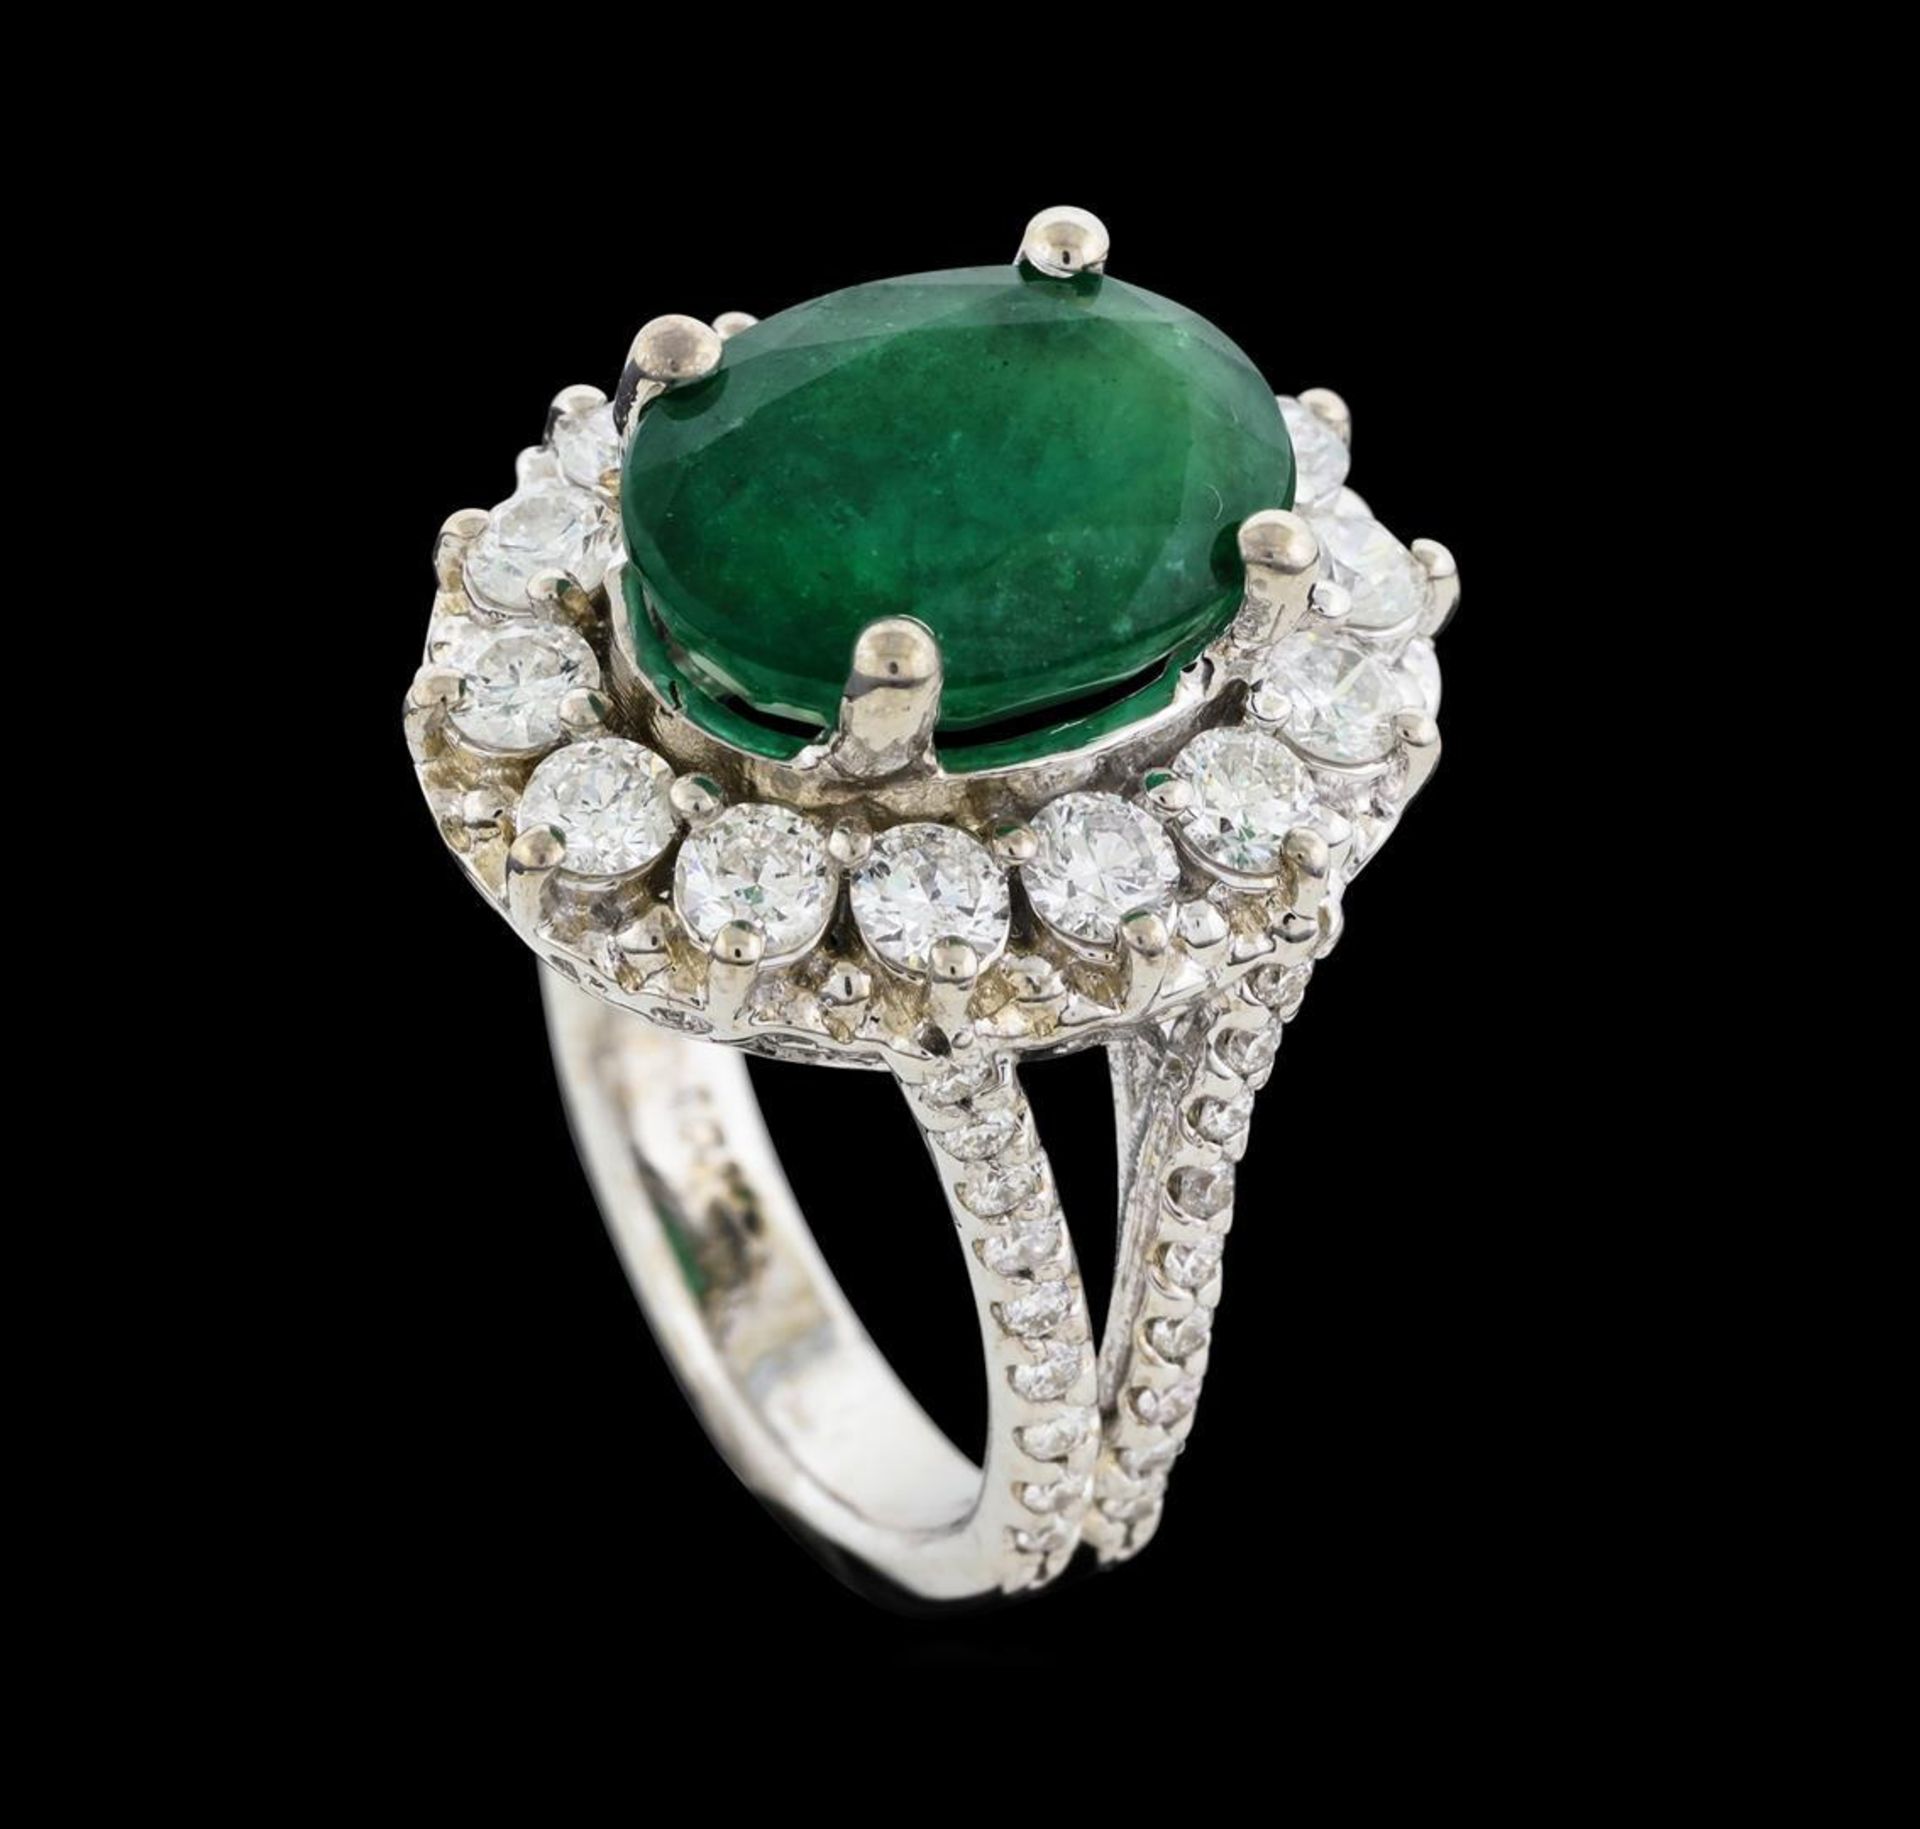 4.70 ctw Emerald and Diamond Ring - 14KT White Gold - Image 4 of 5